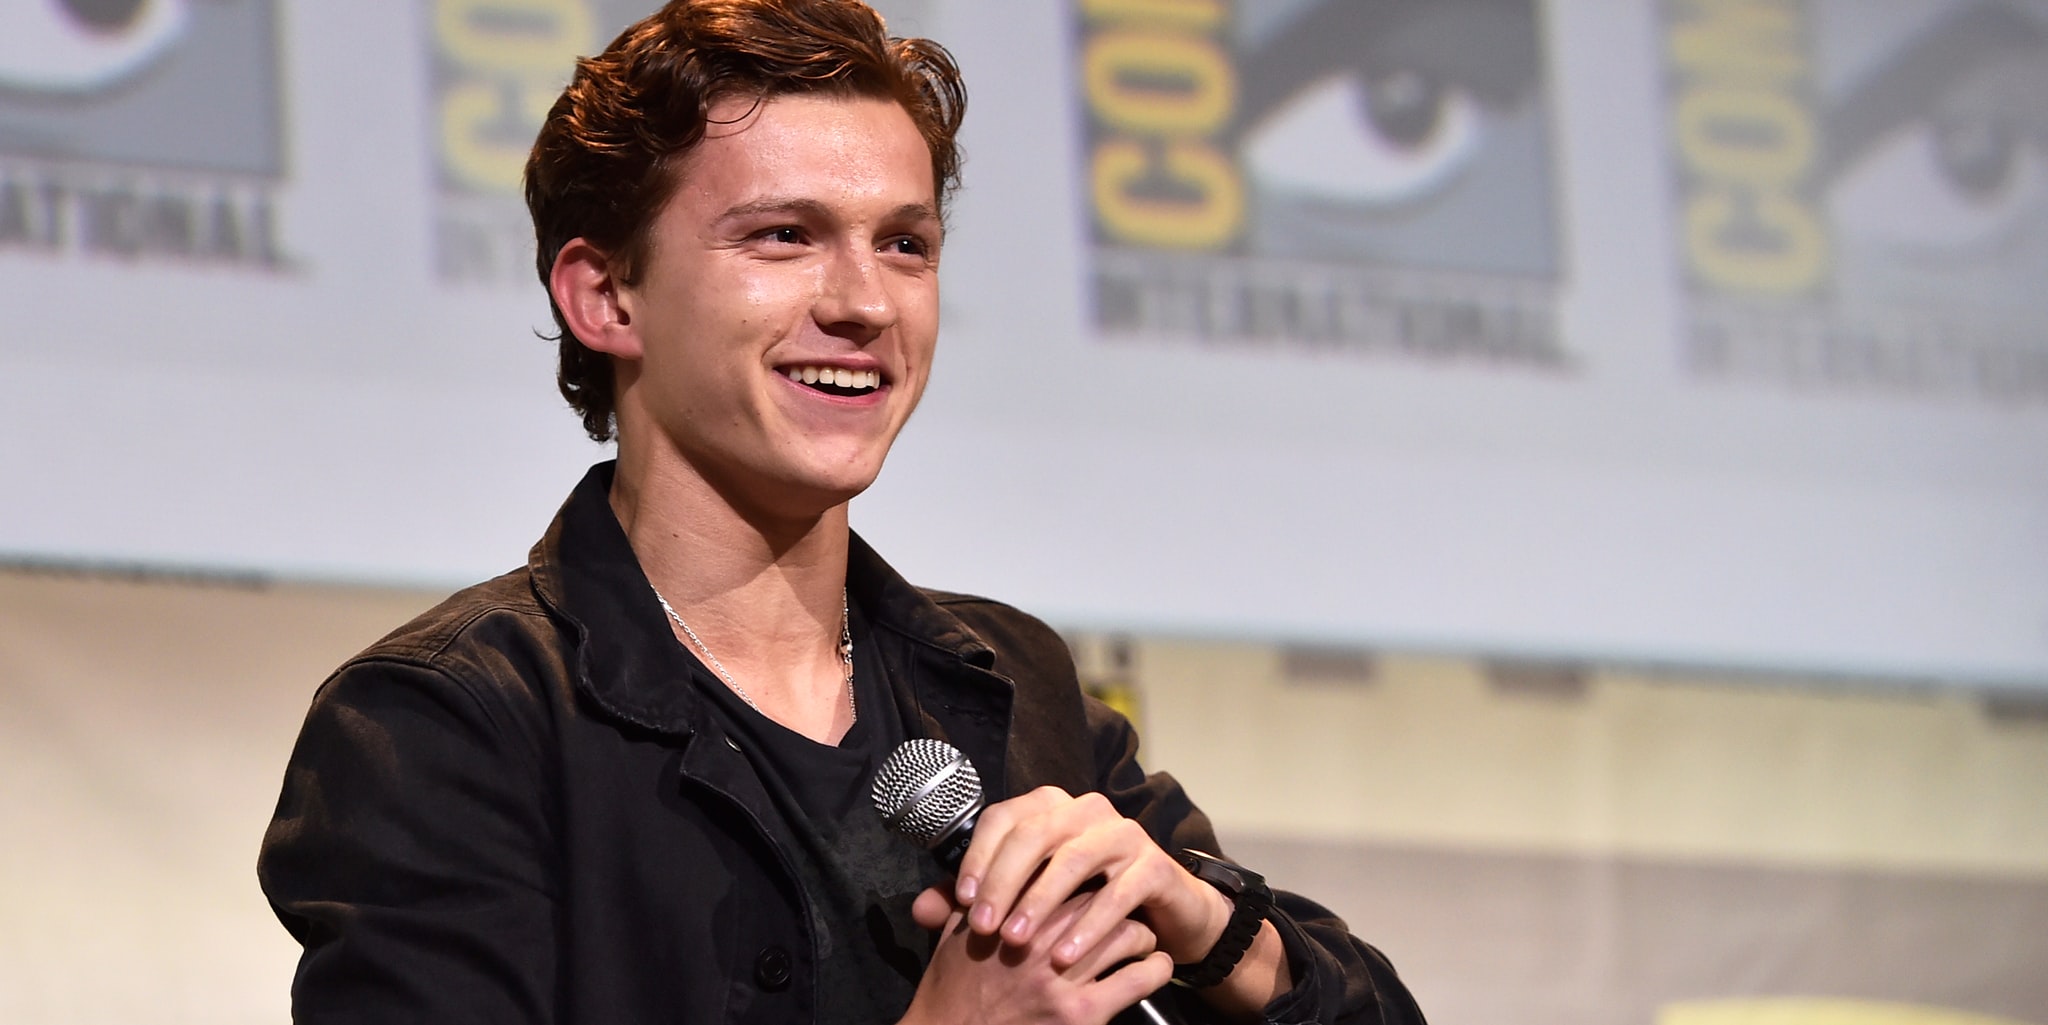 san-diego-ca-july-23-actor-tom-holland-from-marvel-studios-spider-man-homecoming-attends-th